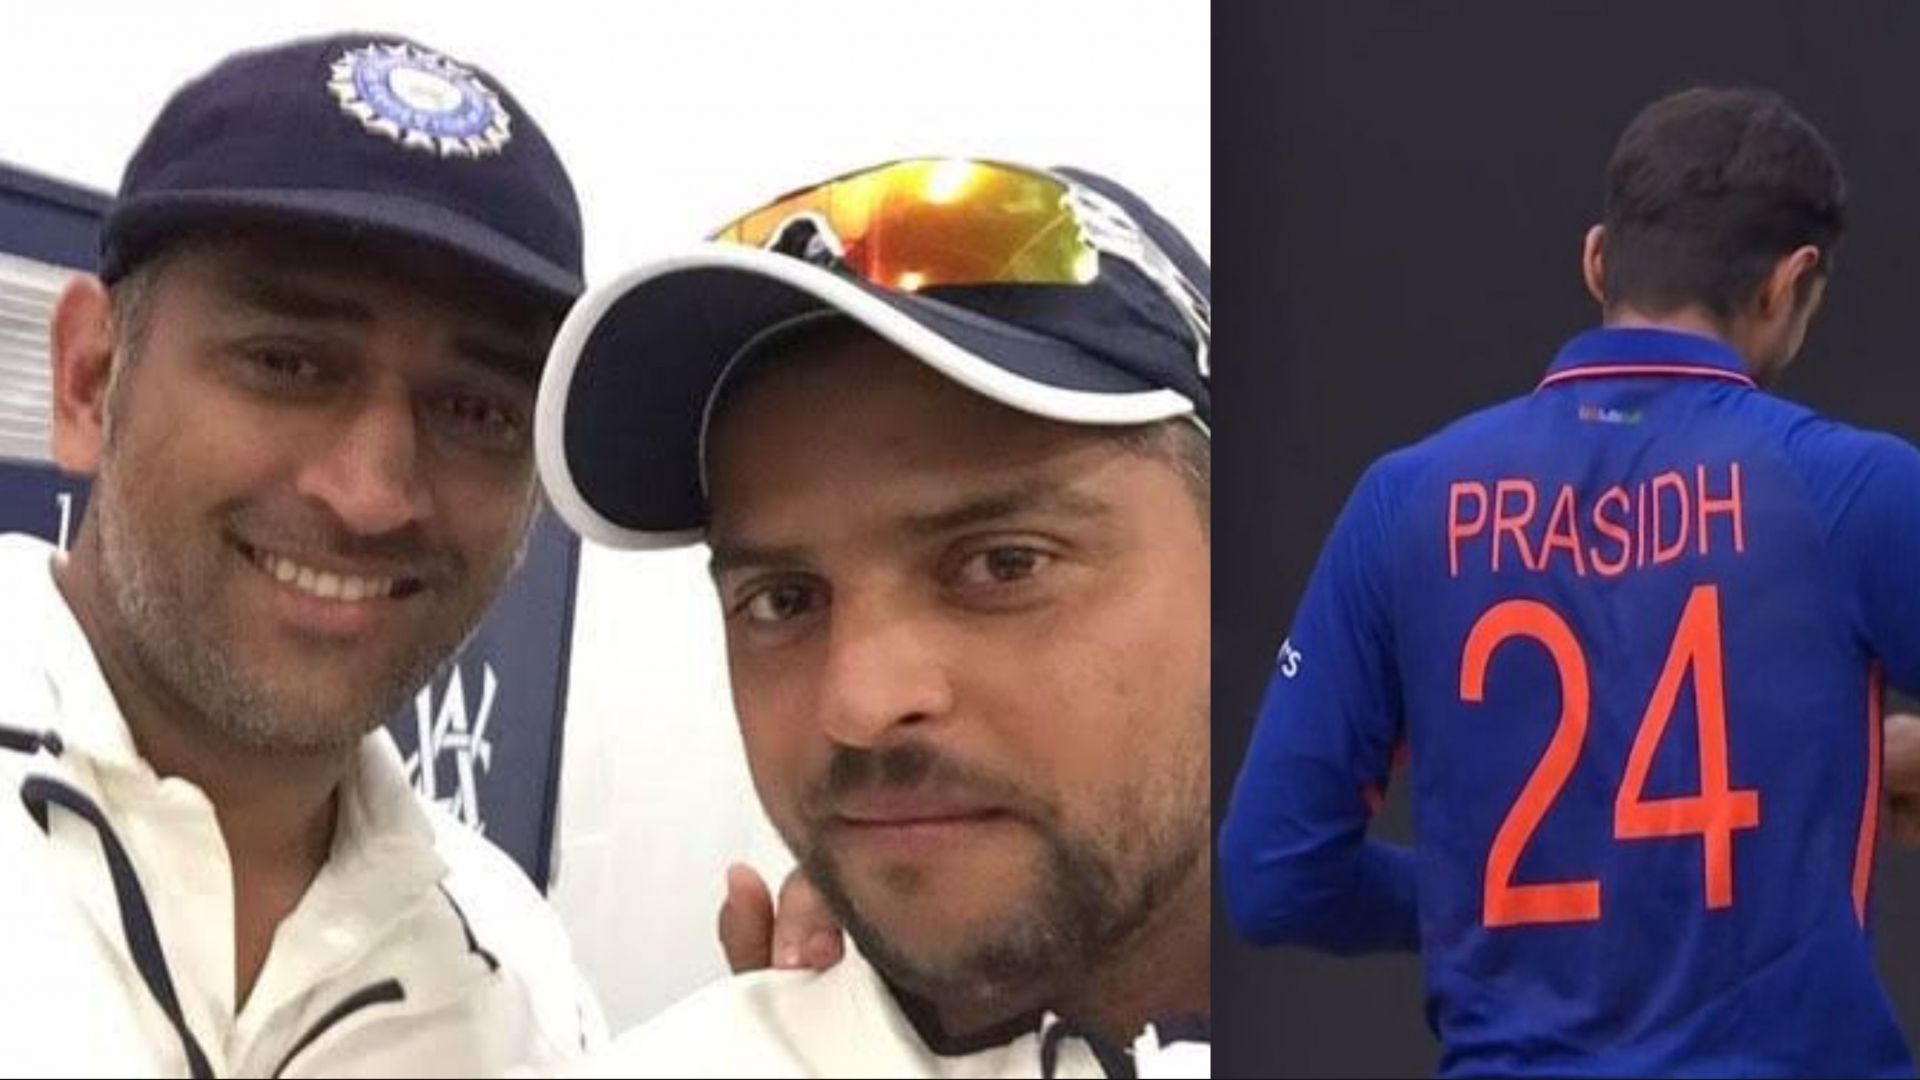 Suresh Raina and Deepak Hooda donned another player&#039;s jersey in international matches (Image: Twitter)